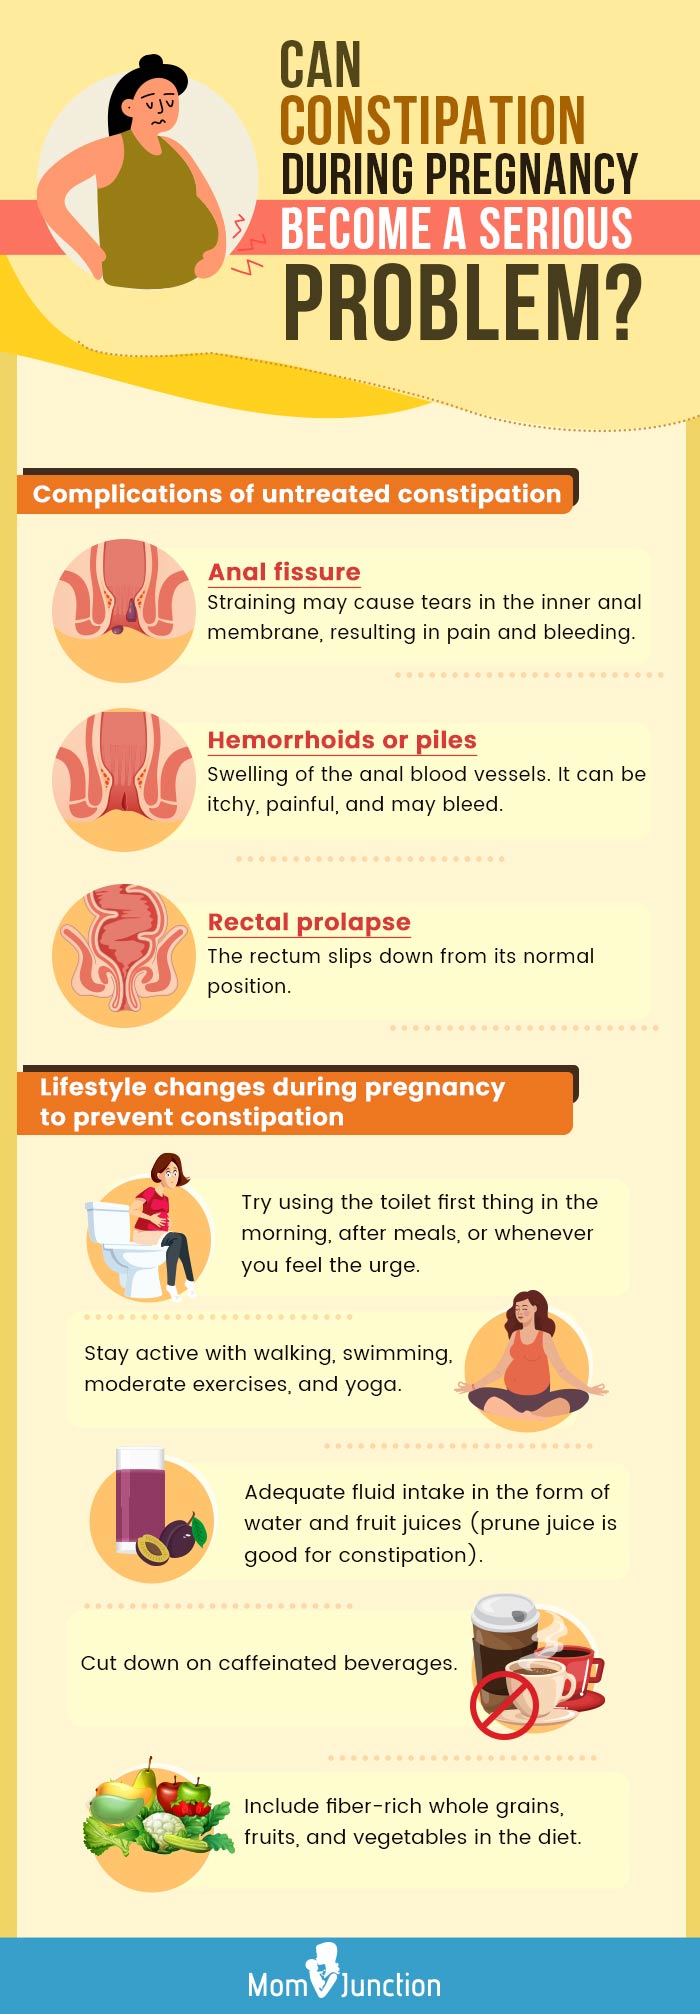 can constipation during pregnancy become a serious problem (infographic)